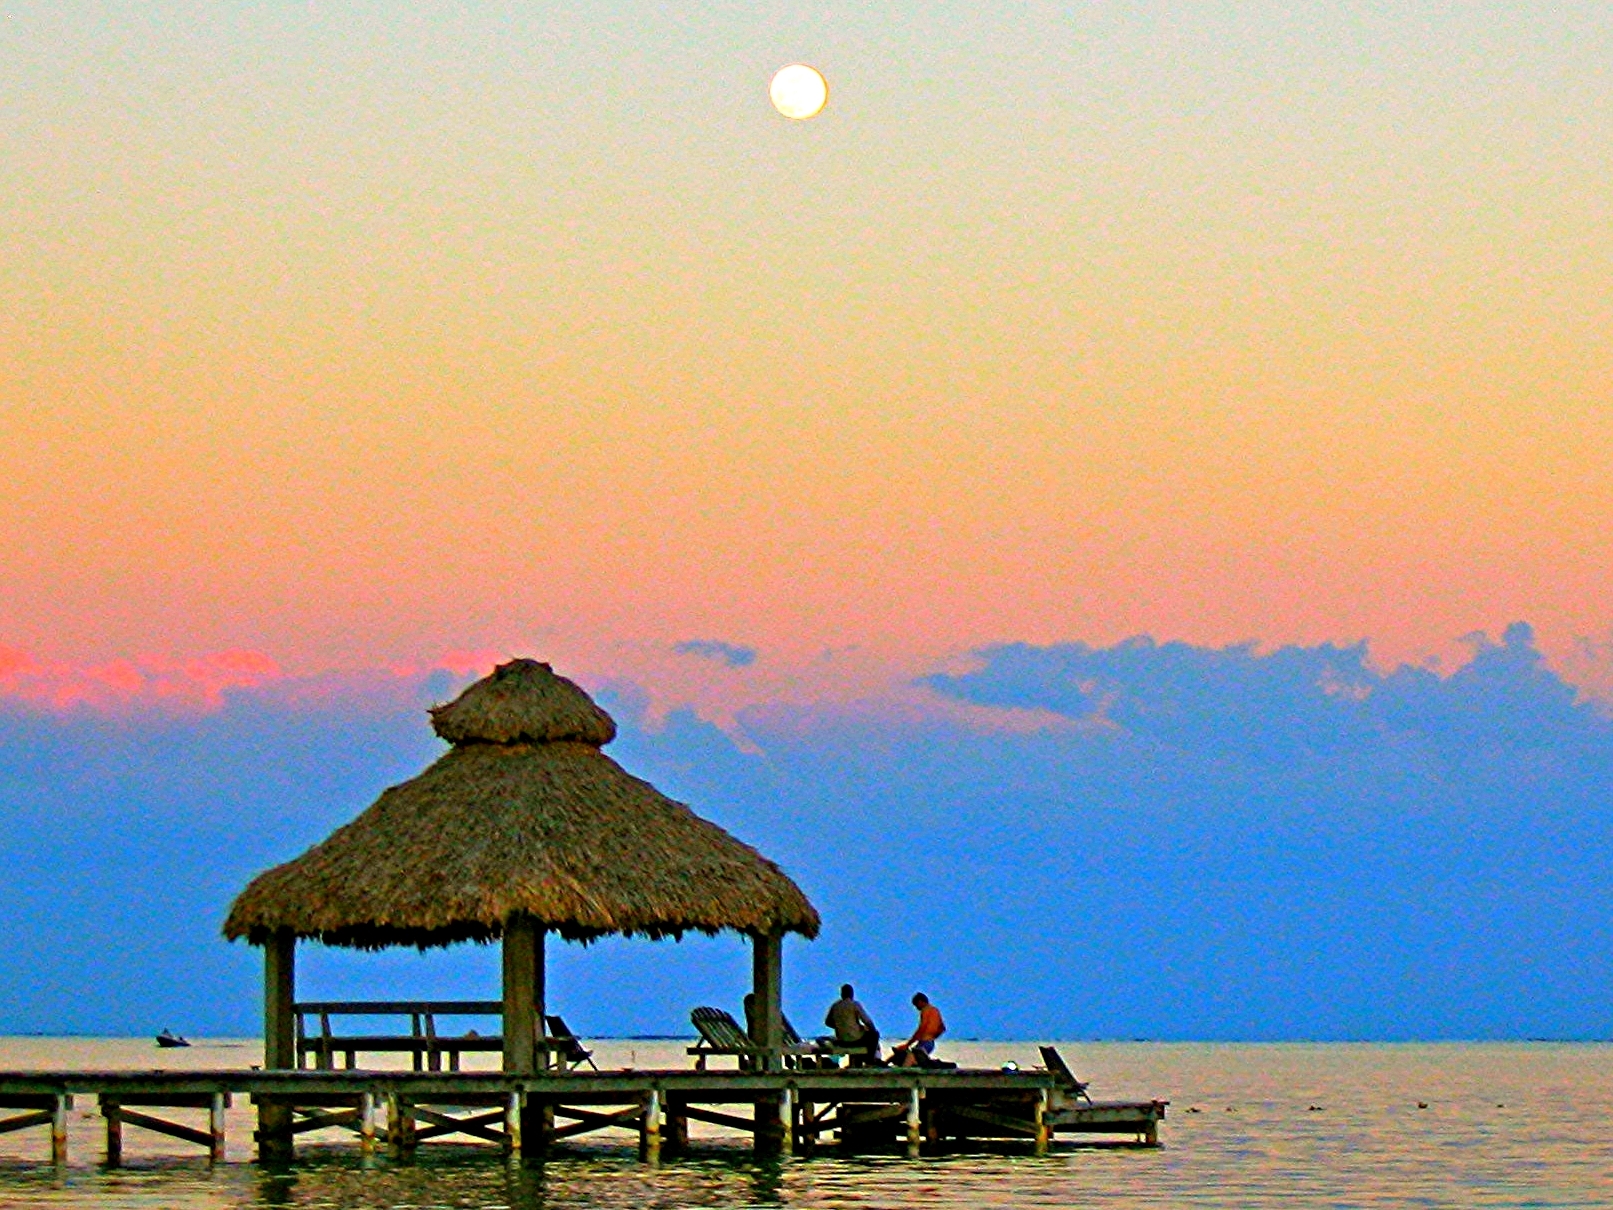 Xanadu Island Resort - Belize Beach Resorts - All inclusive Vacation Packages - SabreWing Travel 